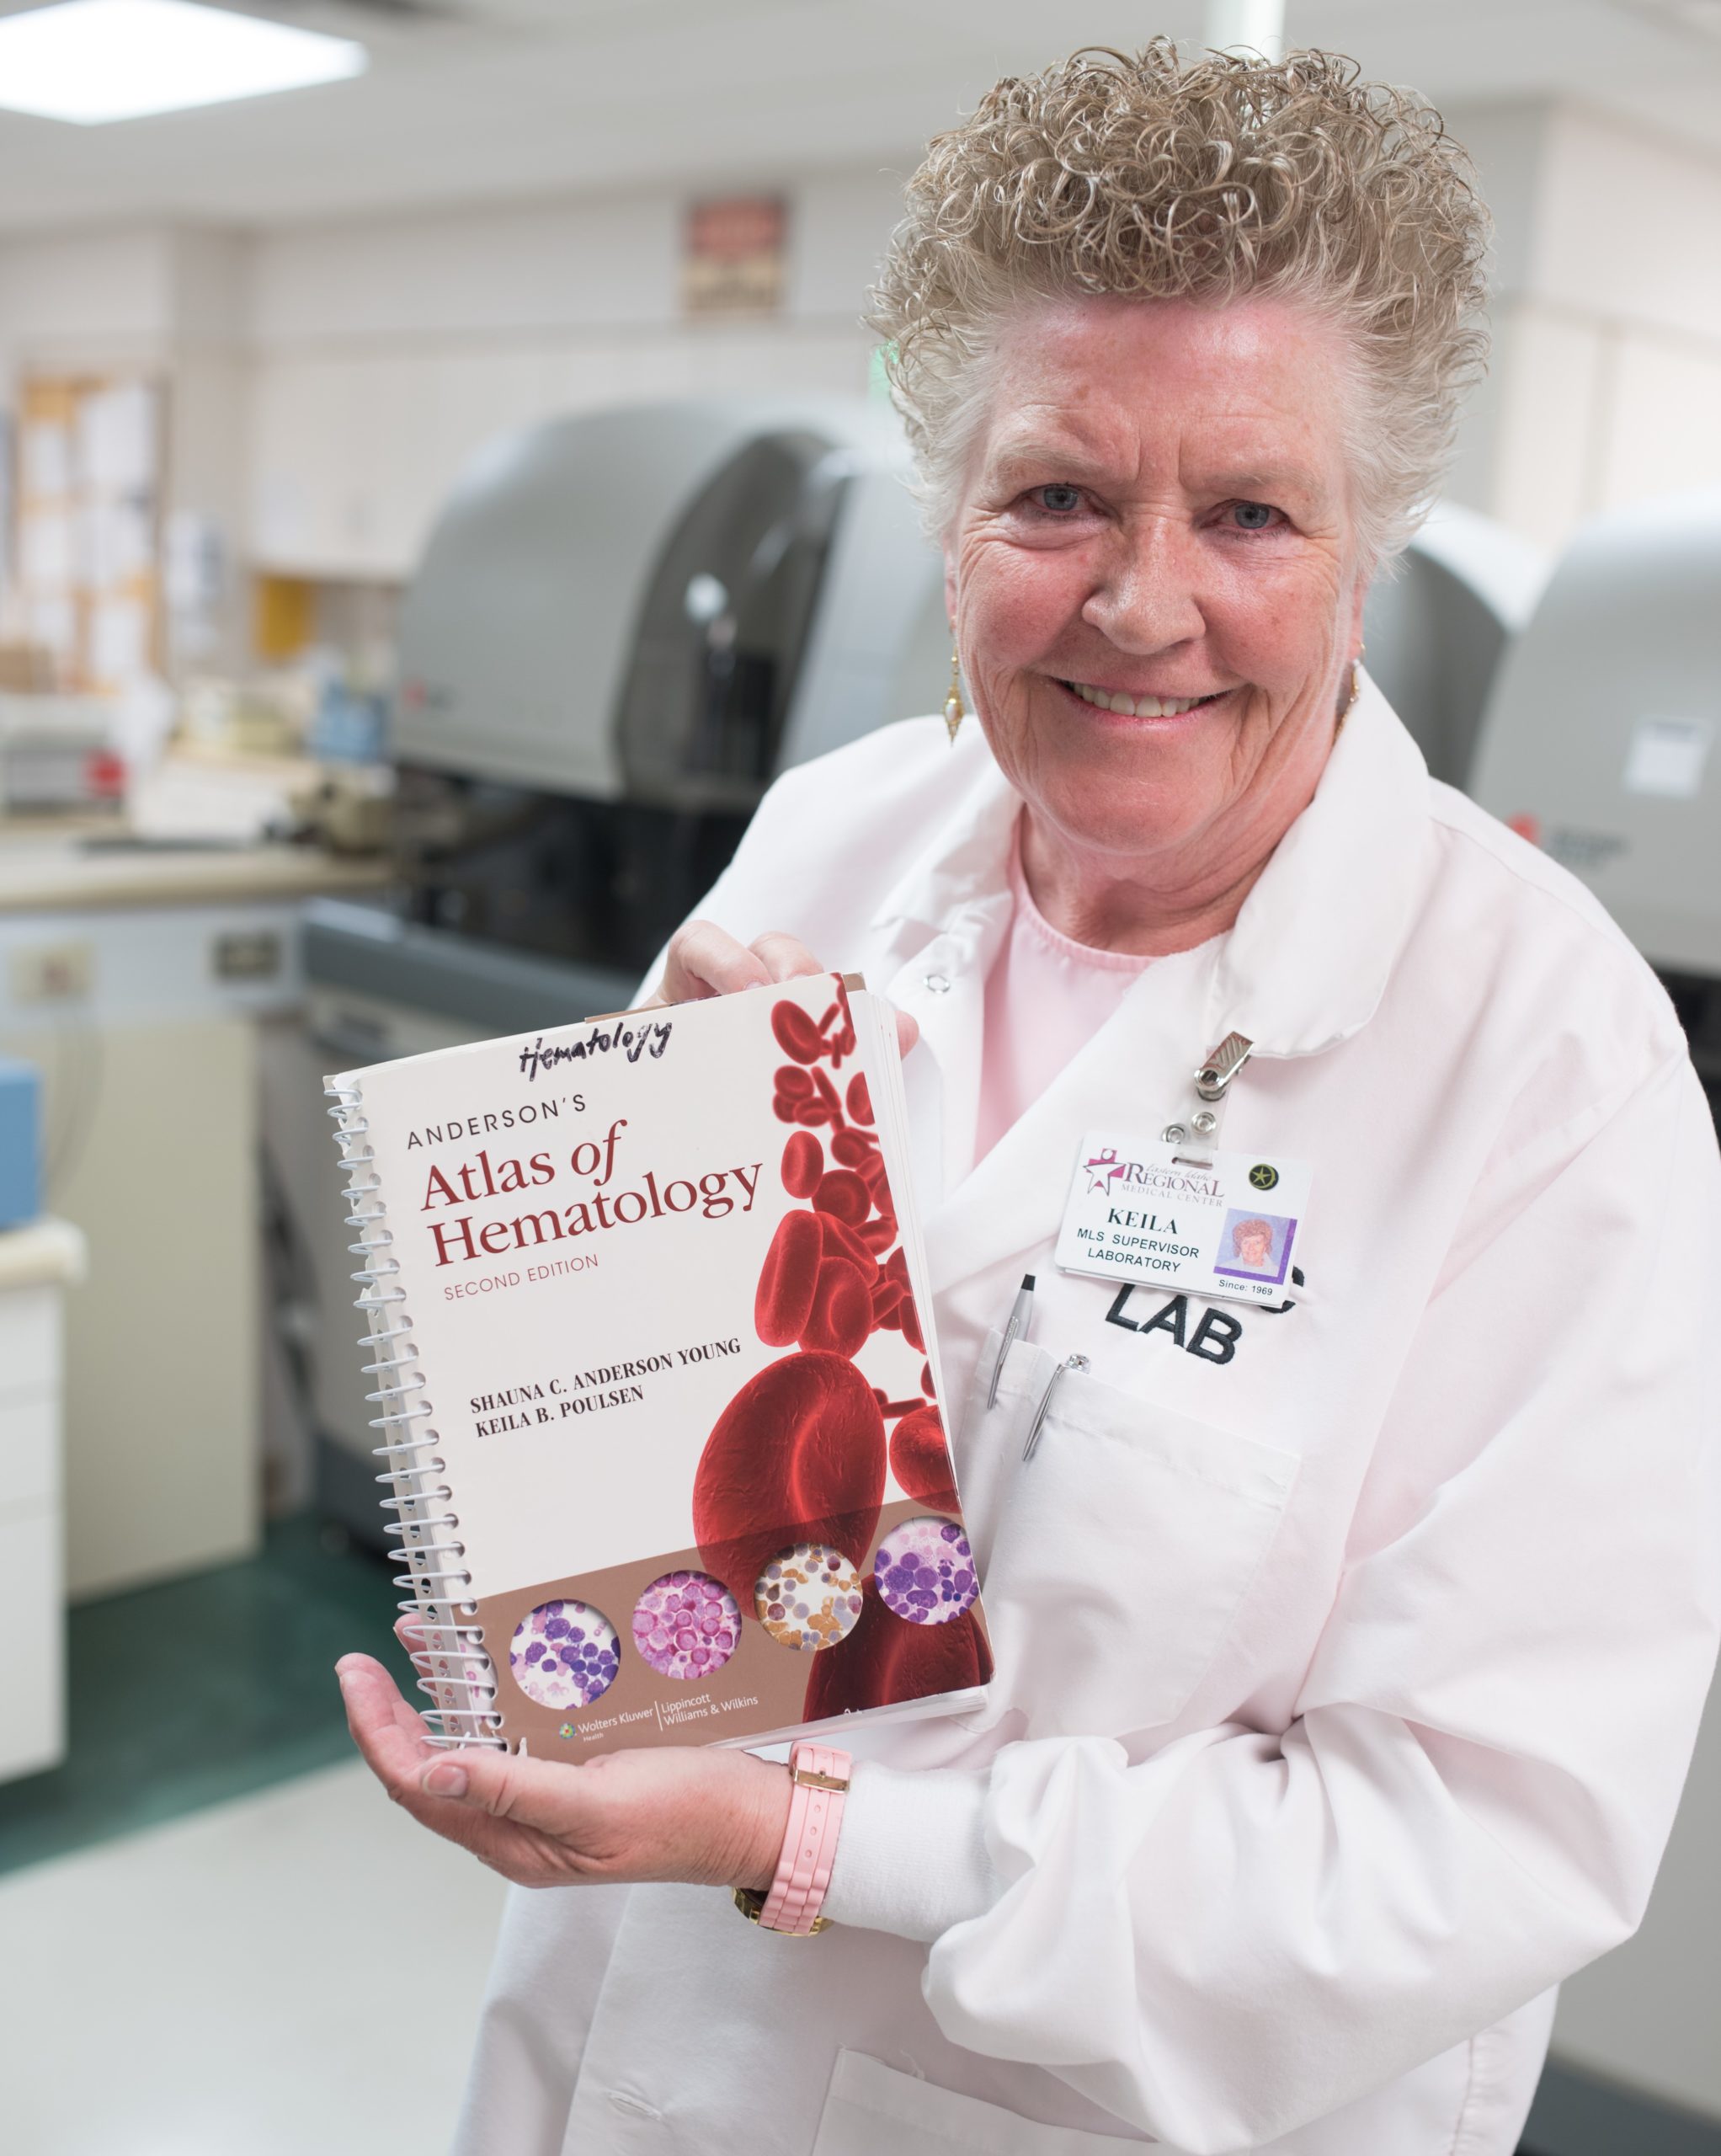 Keila Poulsen standing in a lab, wearing a white lab coat and holding up a book called "Anderson's Atlas of Hematology Second Edition" 